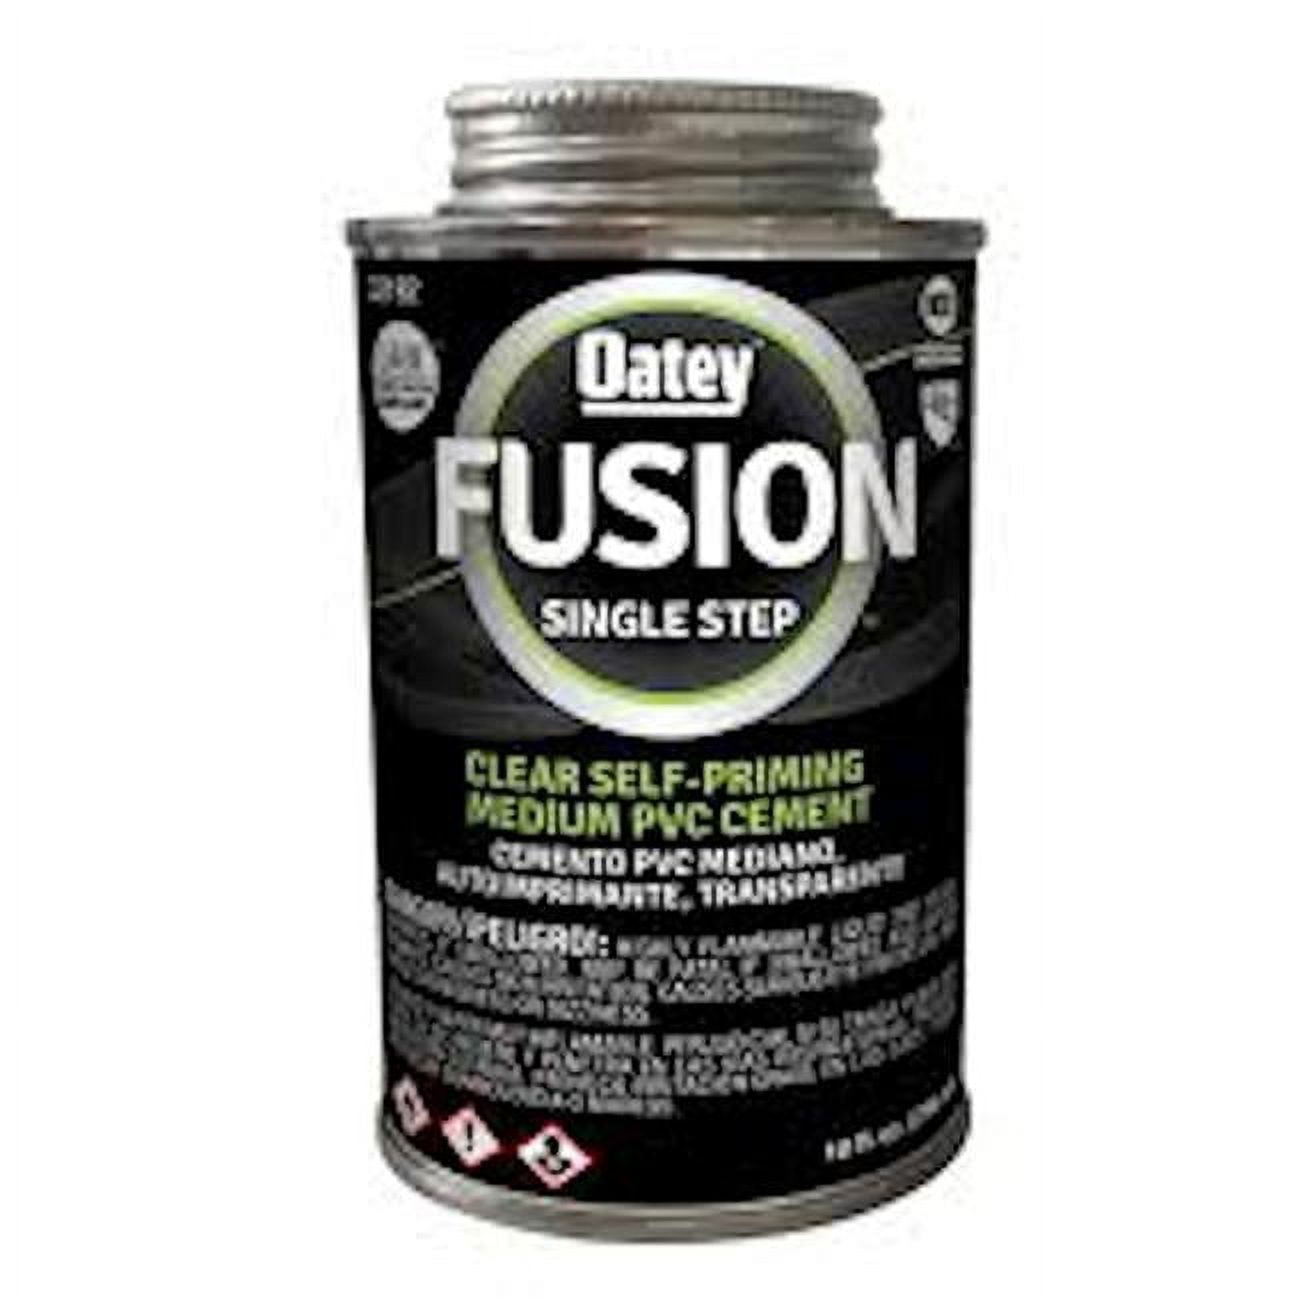 Picture of Oatey 4002399 4 oz Fusion Single Step Clear Cement for Medium PVC